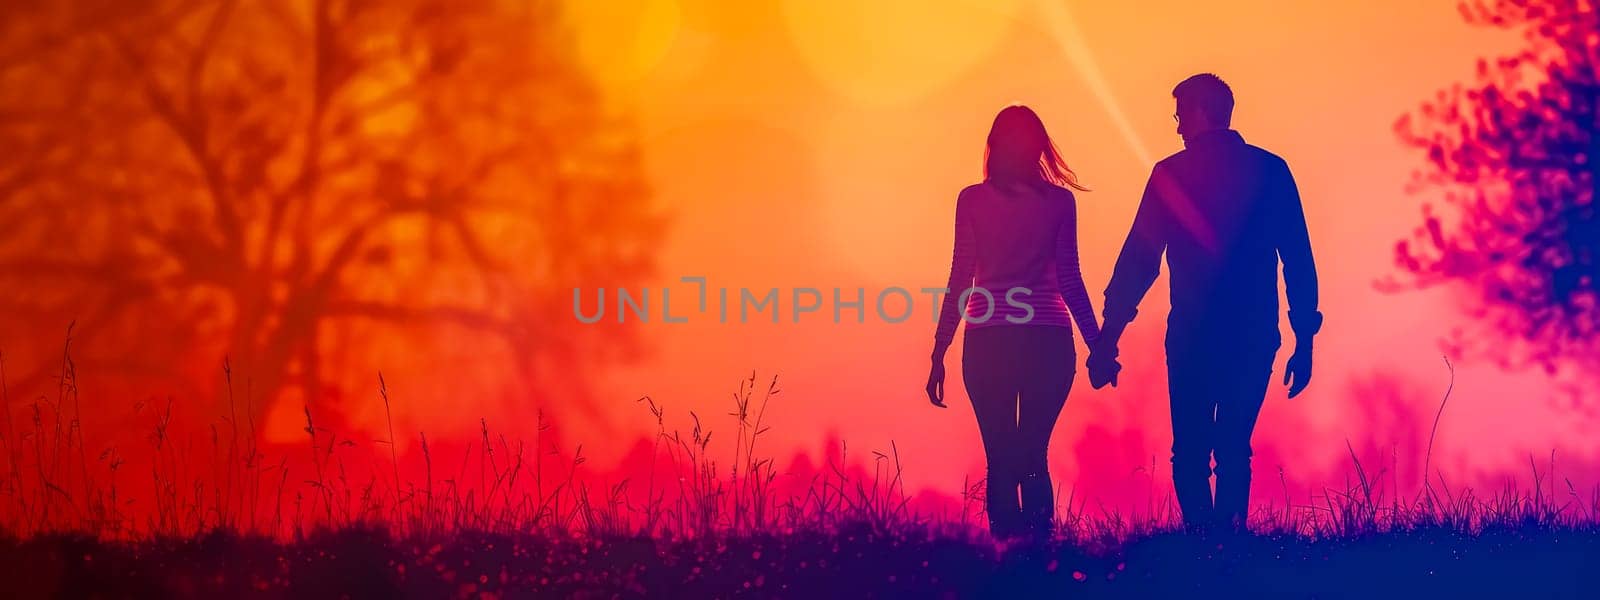 Romantic scene of a couple's silhouette against a vibrant sunset